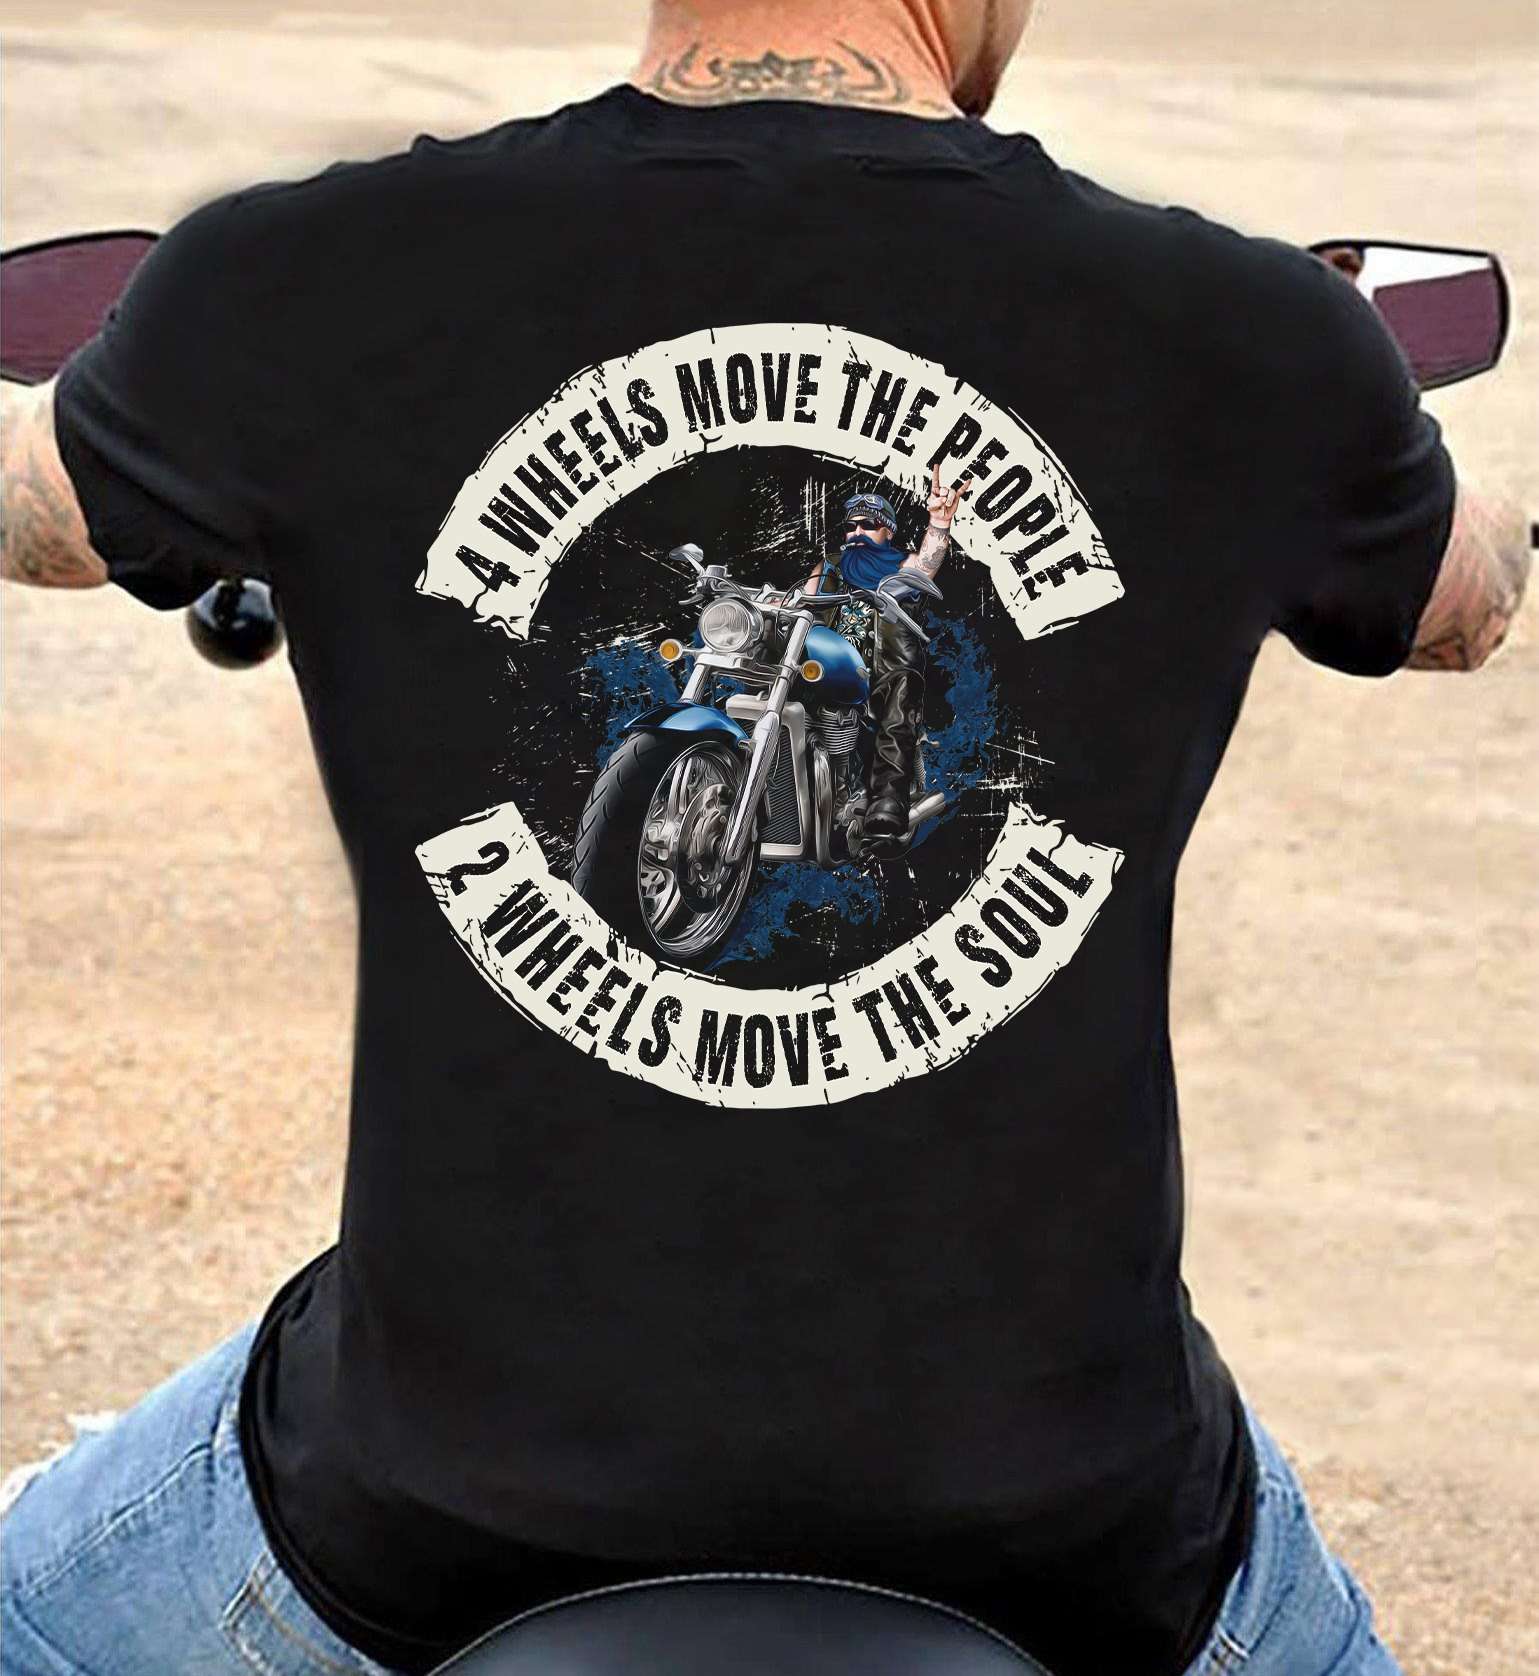 4 wheels move the people, 2 wheels move the soul - 2 wheel motorcycle, Man riding motorcycle